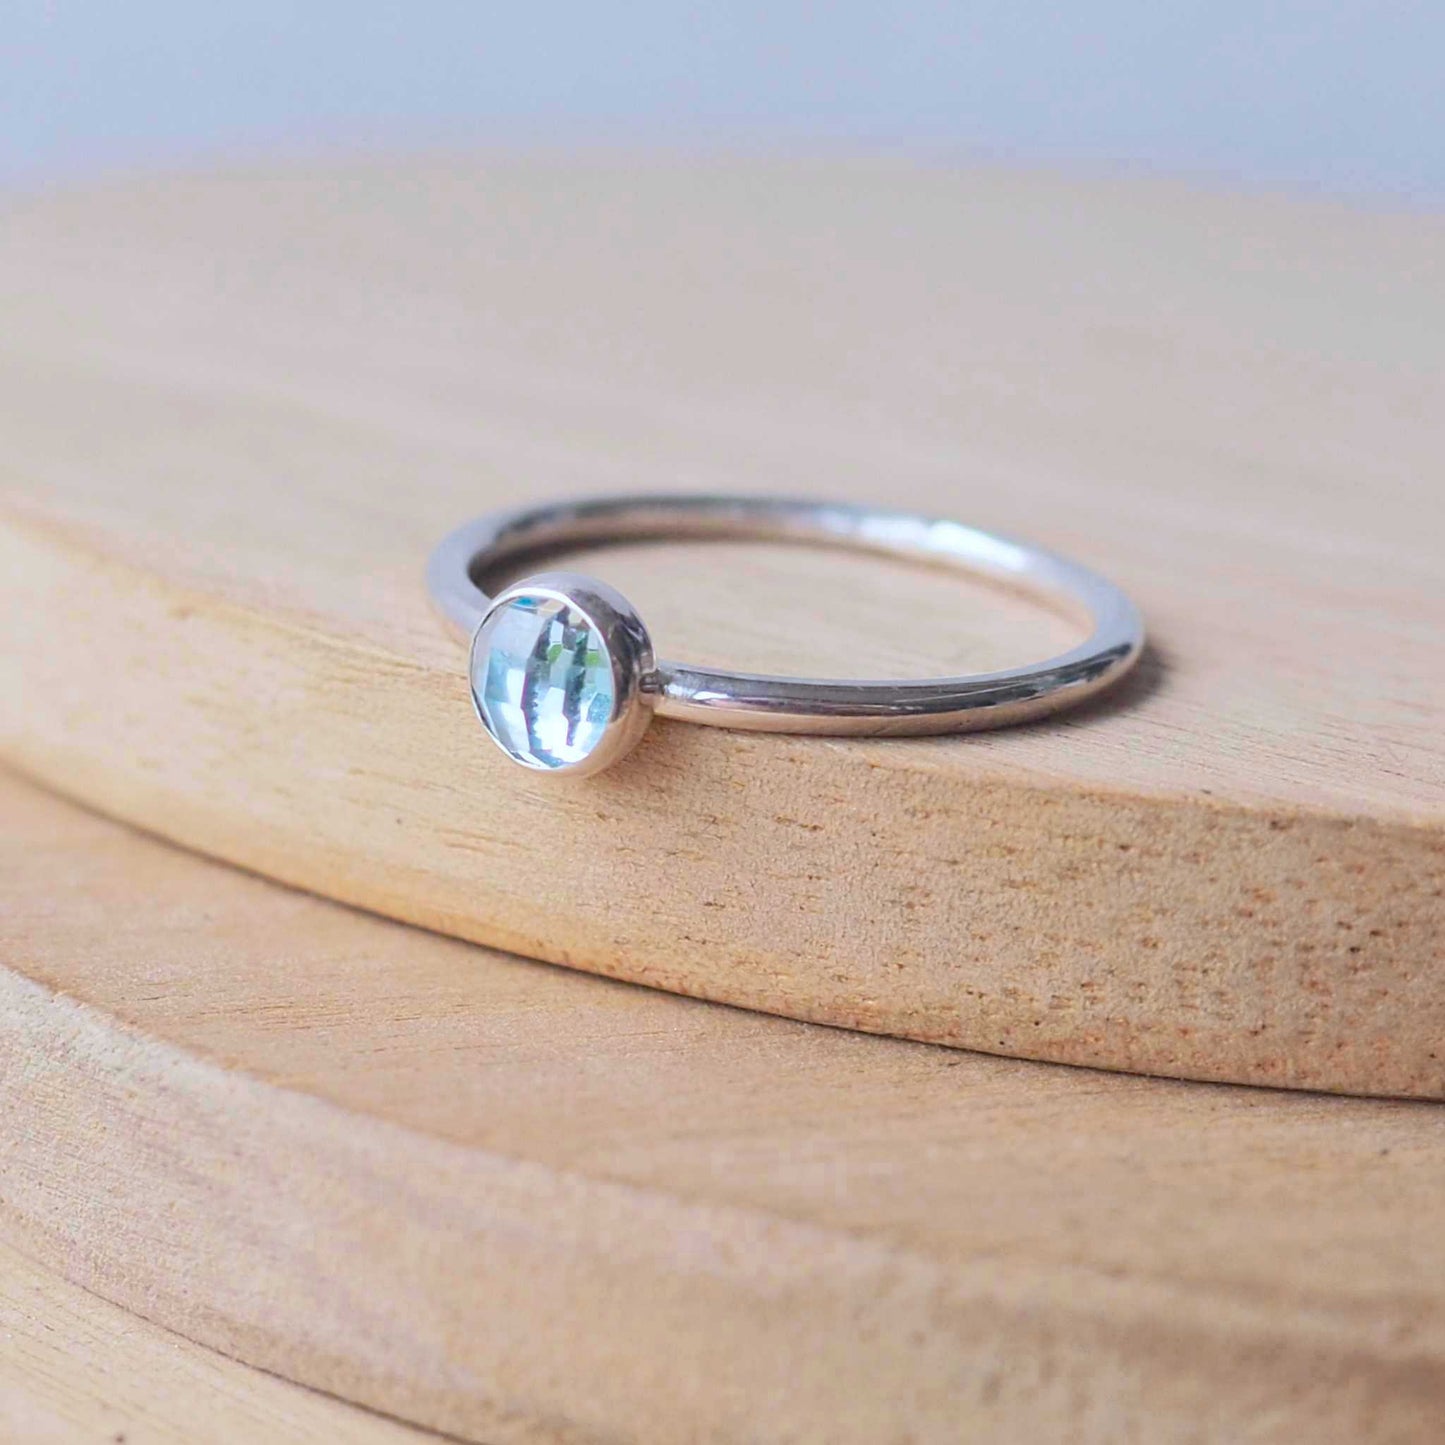 Blue Topaz and Sterling Silver March Birthstone Ring. A 5mm round pale blue Topaz cabochon set very simply onto a round band of sterling silver. handmade by maram jewellery in Scotland